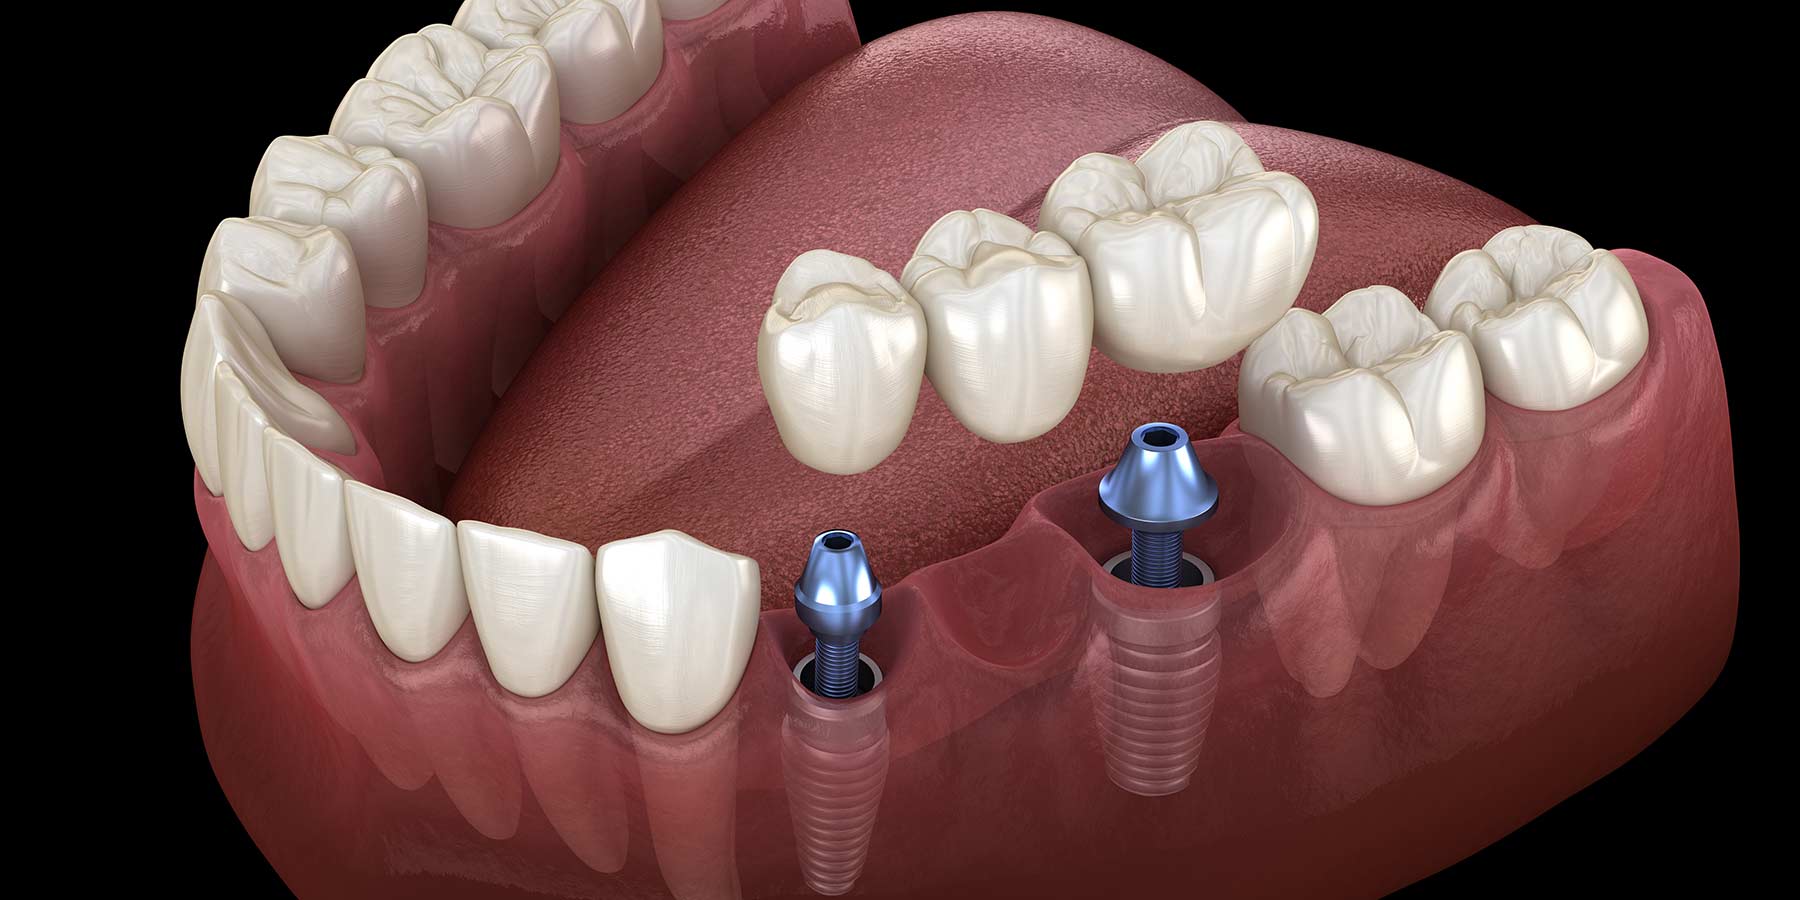 Tooth Replacement - The Advantages of Dental Implants